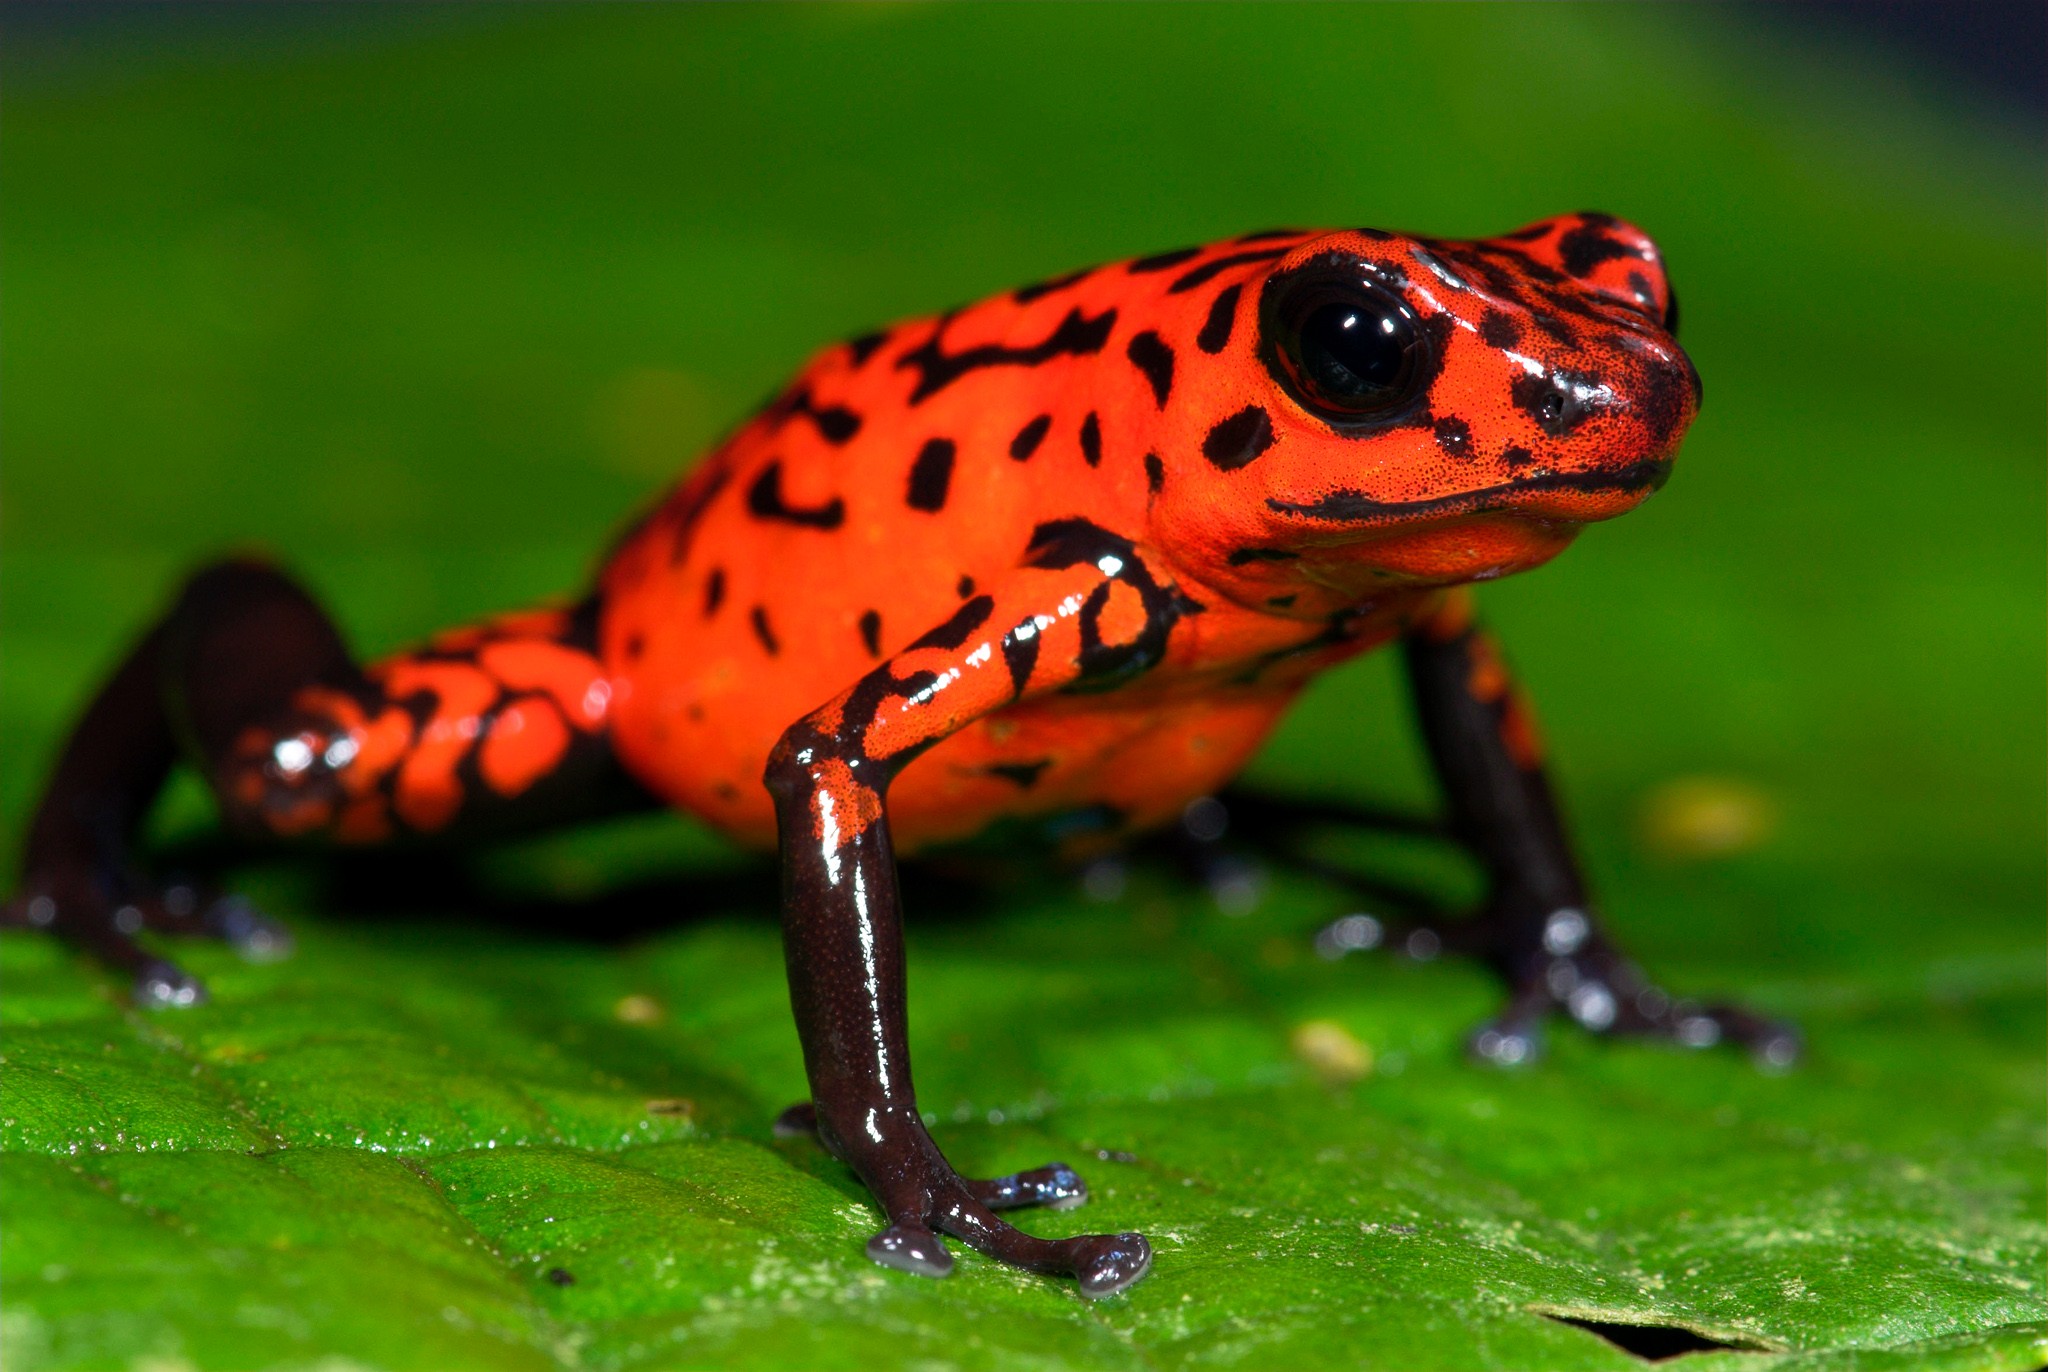 General 2048x1372 frog animals nature poison dart frogs amphibian closeup green background